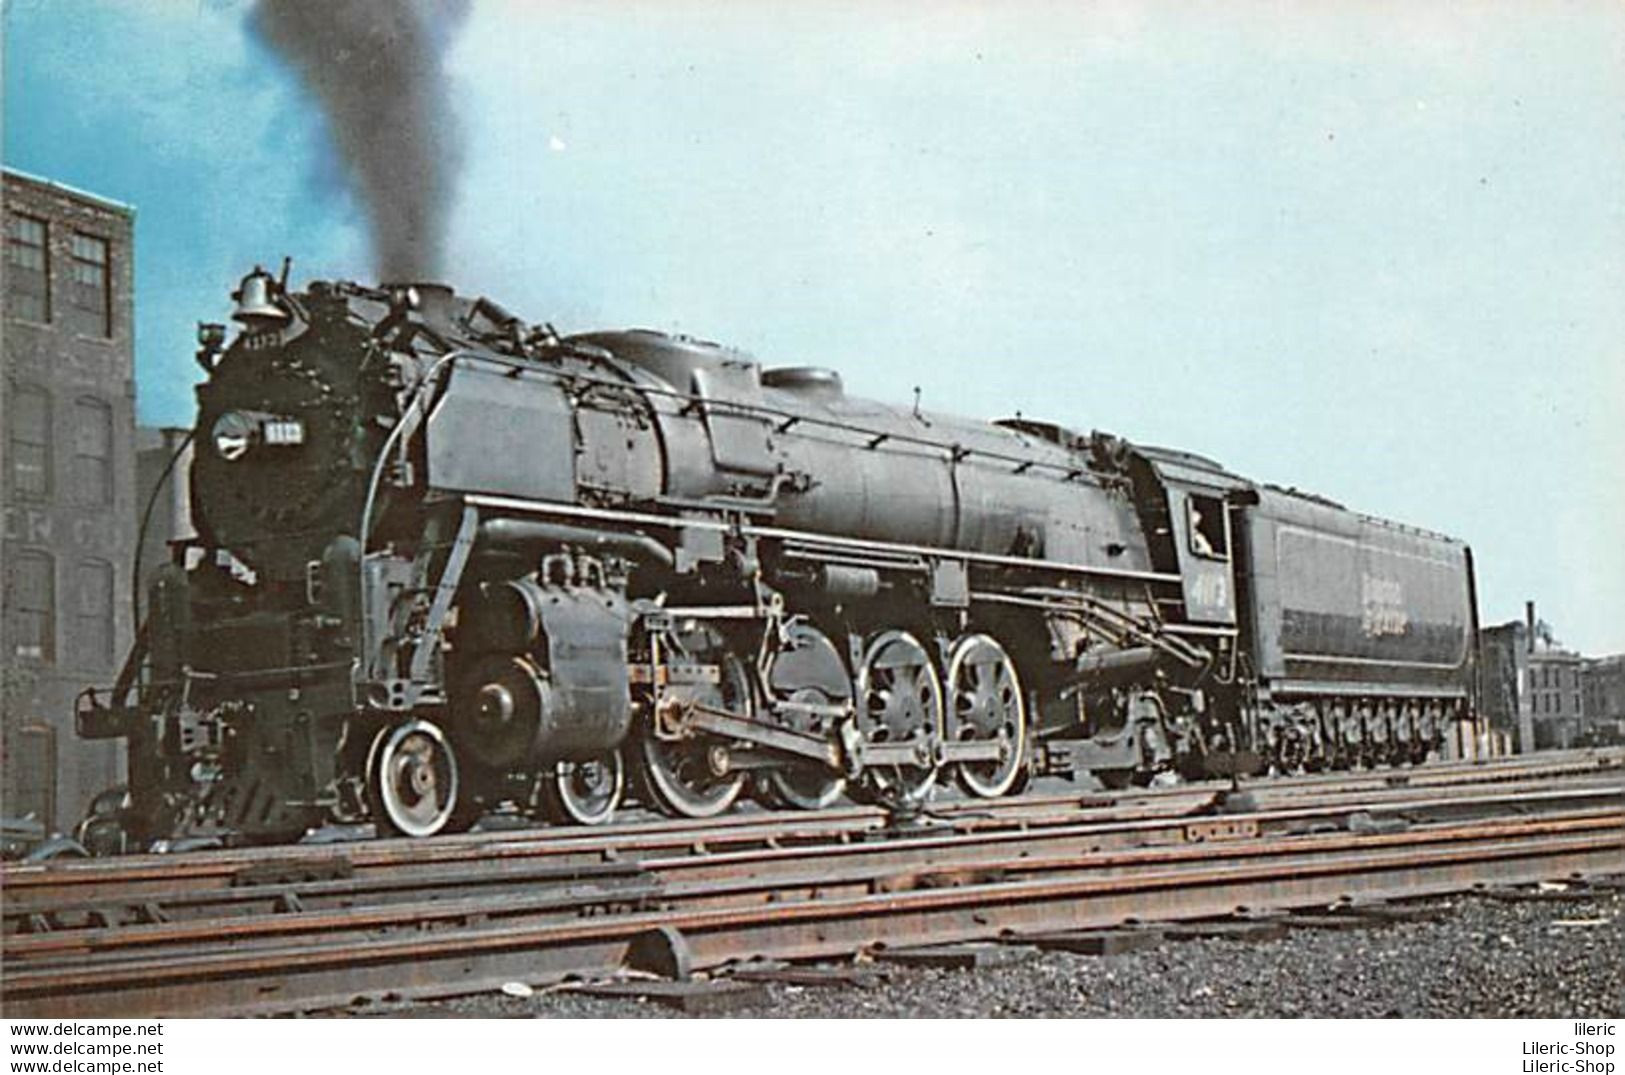 BOSTON & MAINE 4113 CARRIED THE NAME " BLACK ARROW " - WORCESTER, MASS, IN 1946 # TRAINS # US - Trenes